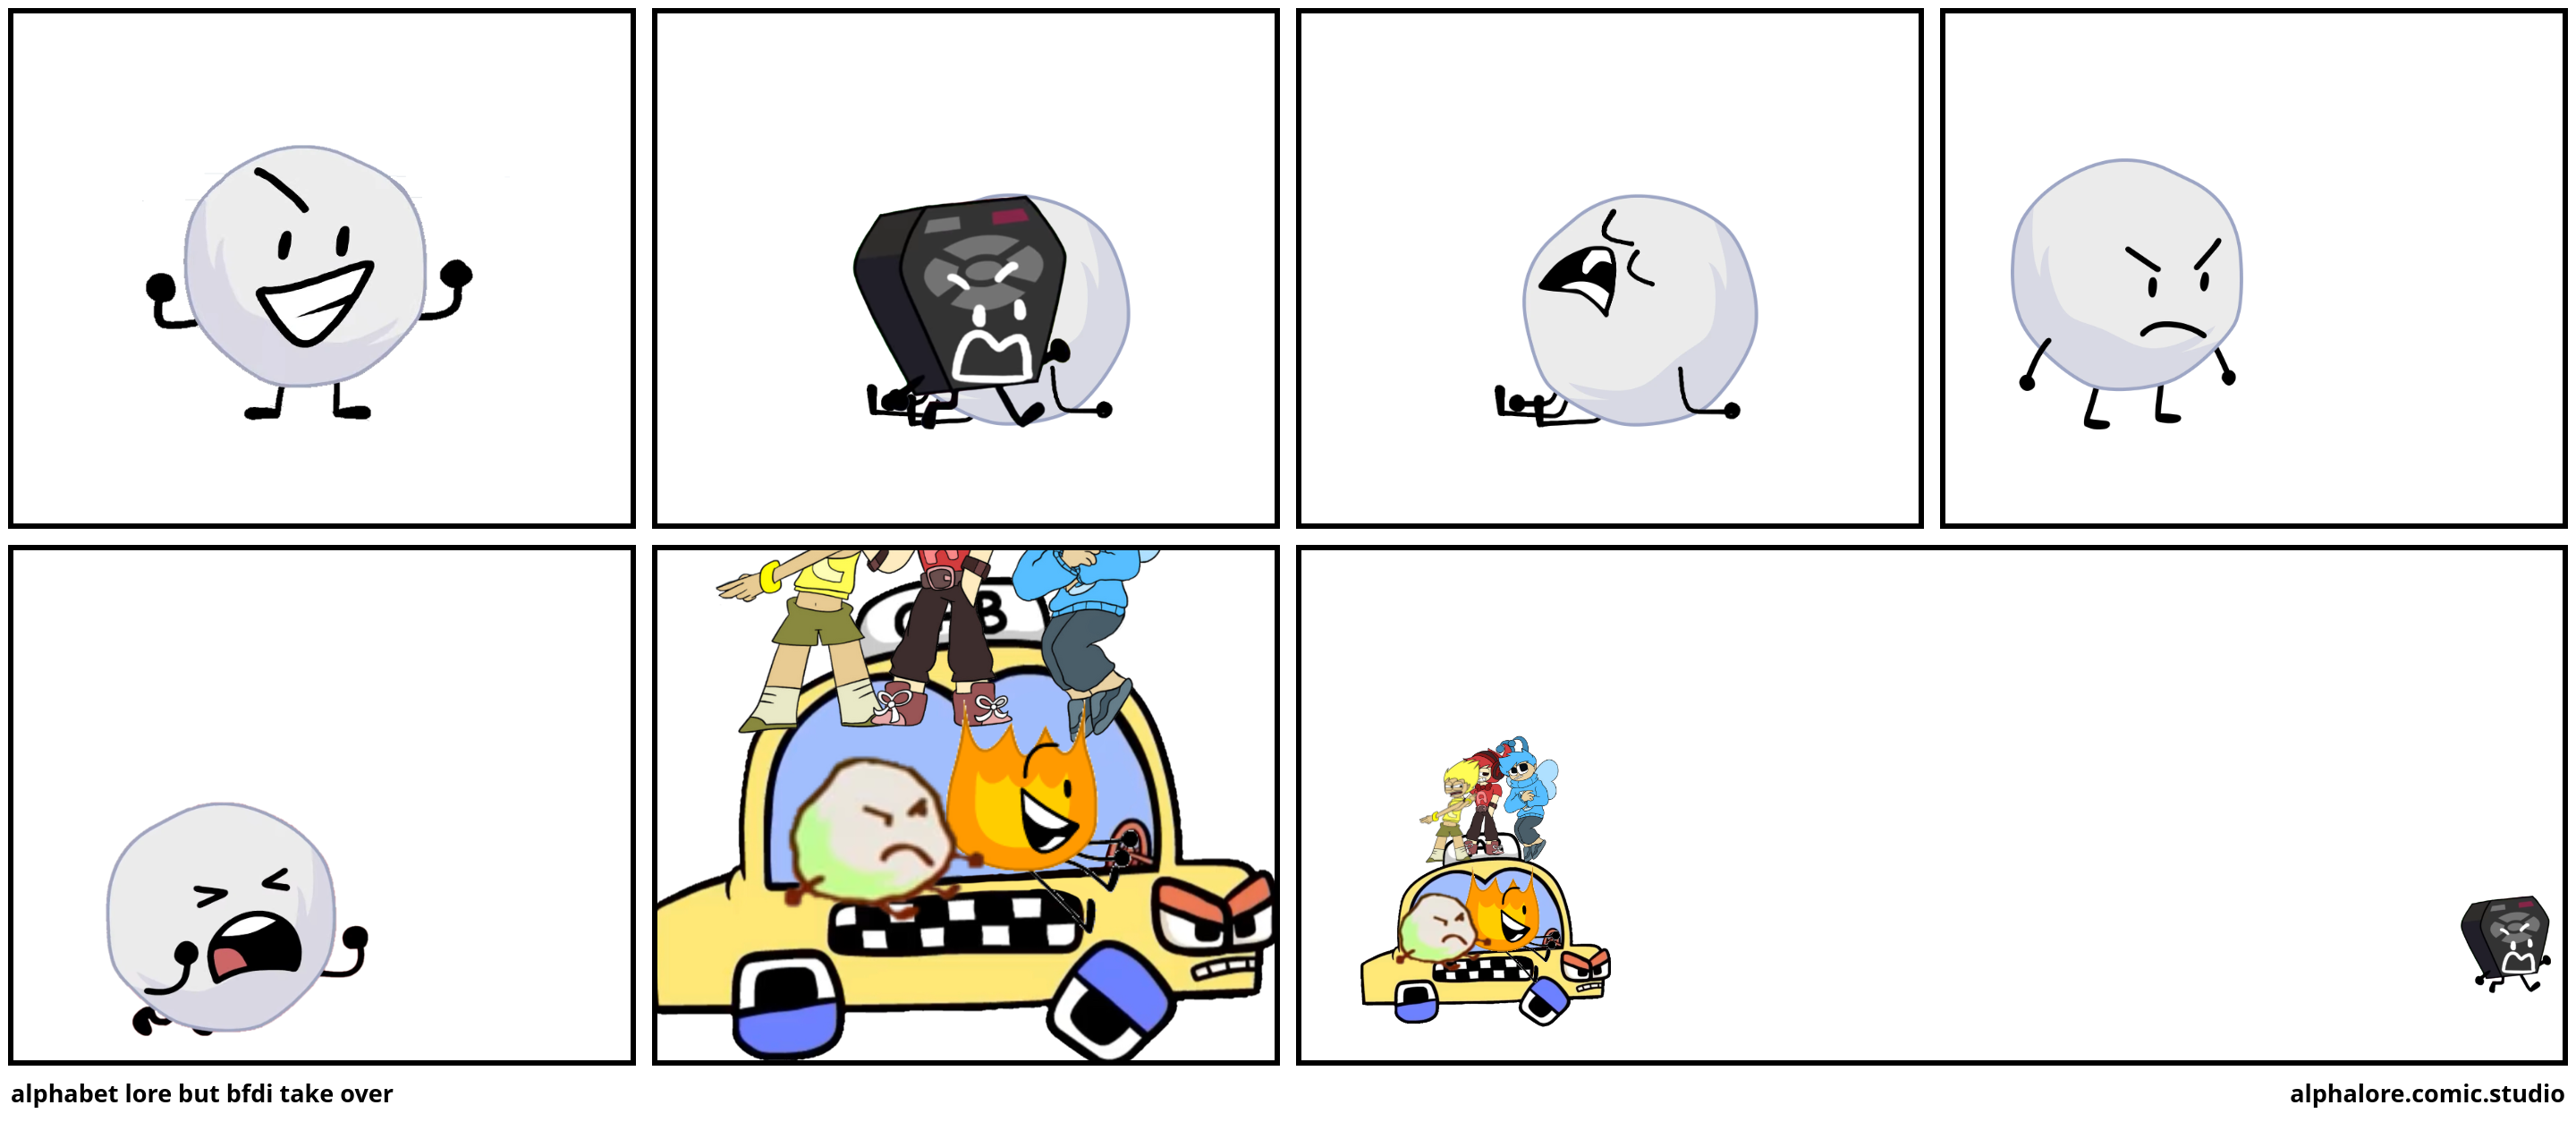 alphabet lore but bfdi take over